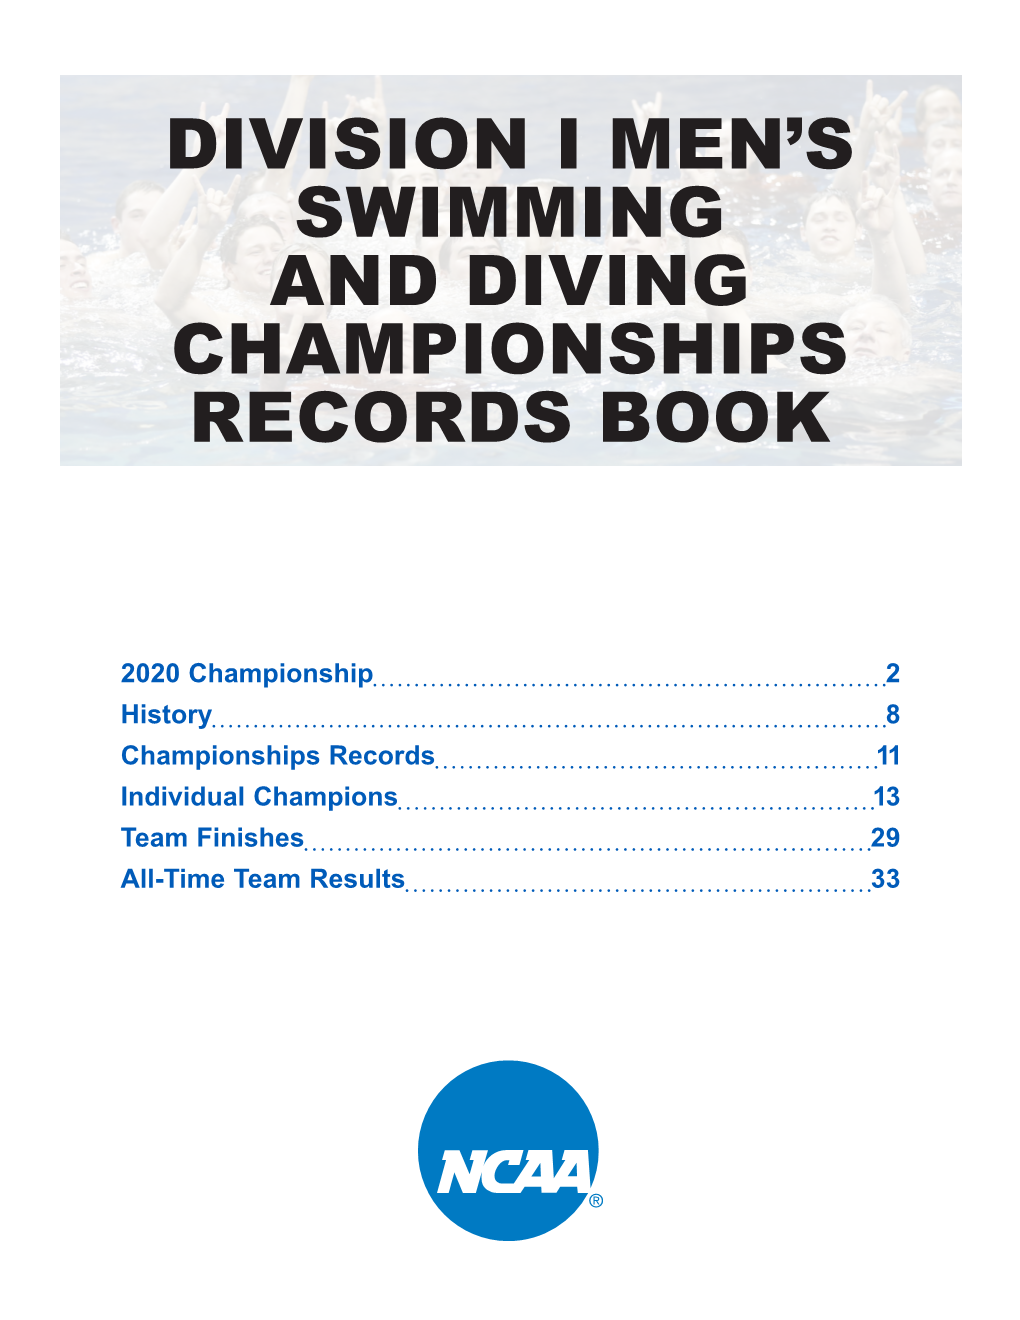 Division I Men's Swimming and Diving